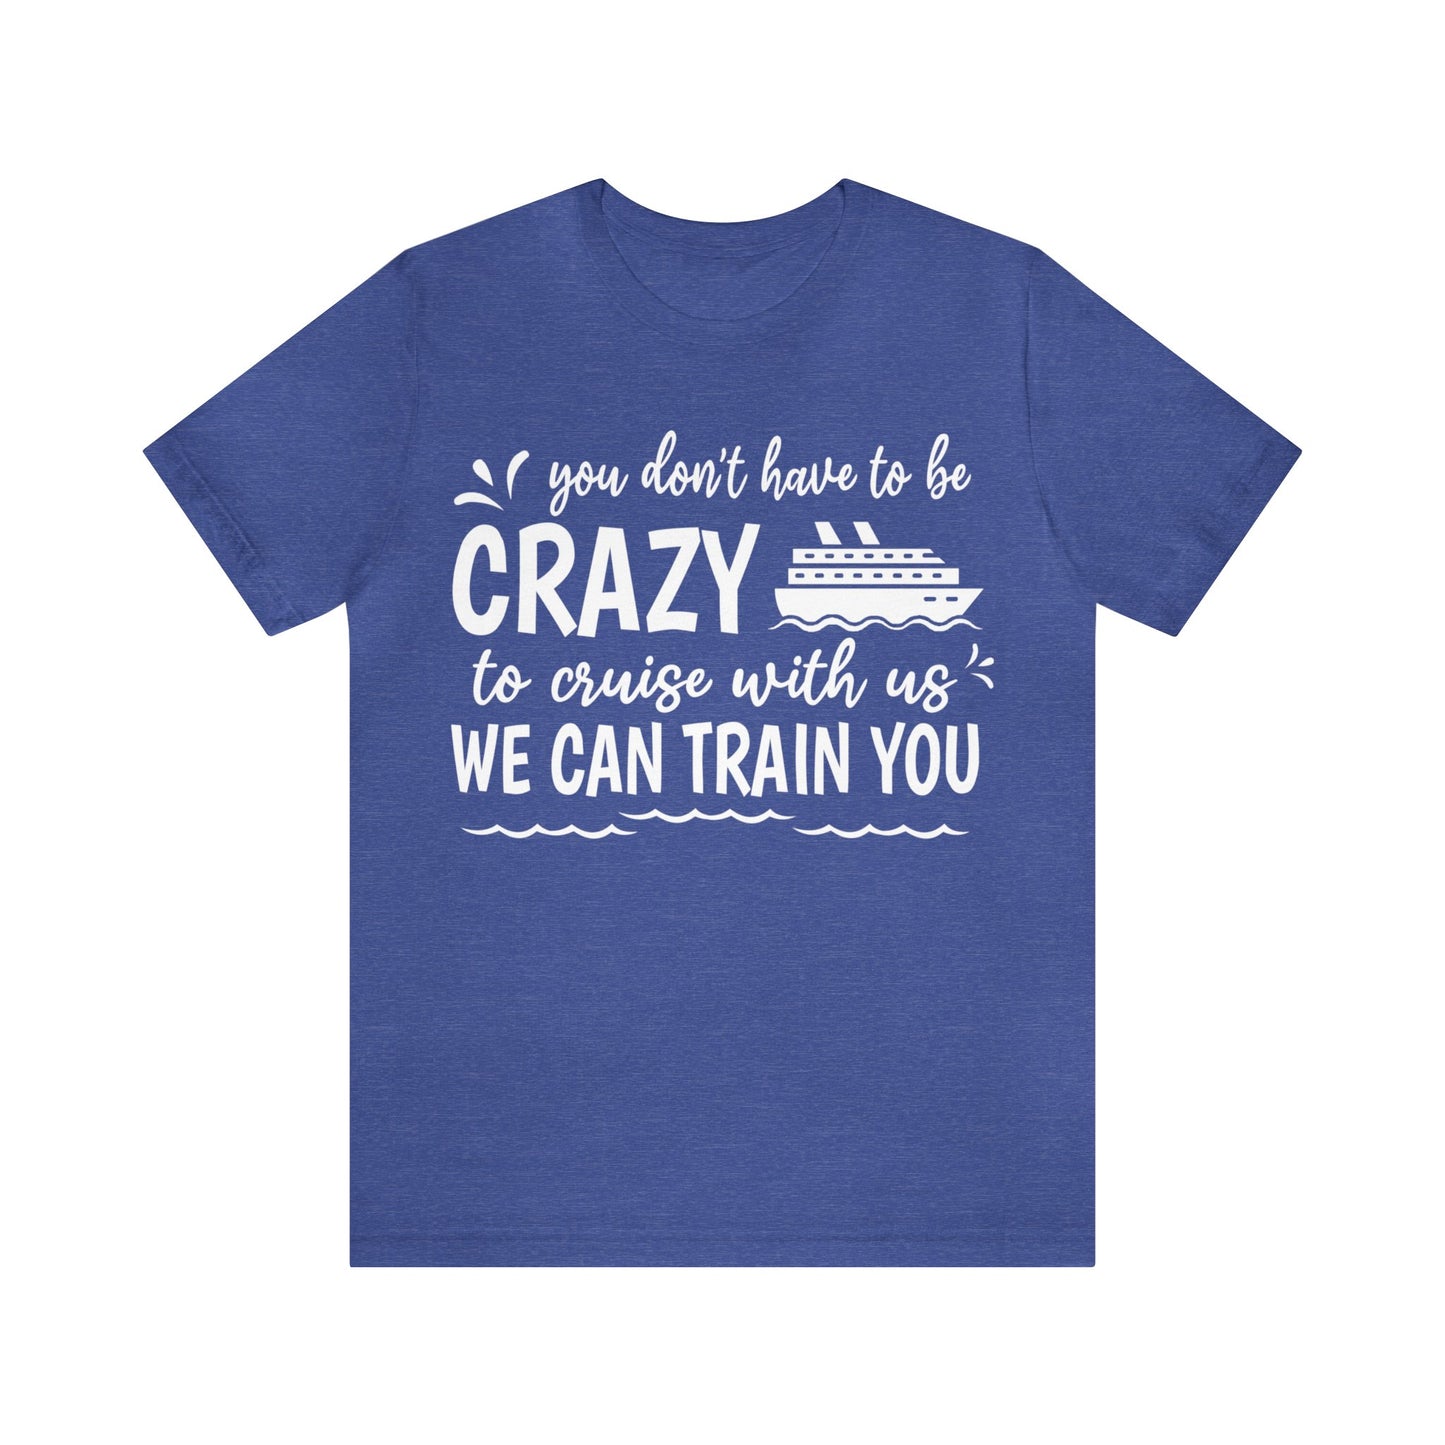 You don't have to be CRAZY to cruise with us We can train you Shirt in Heather Royal